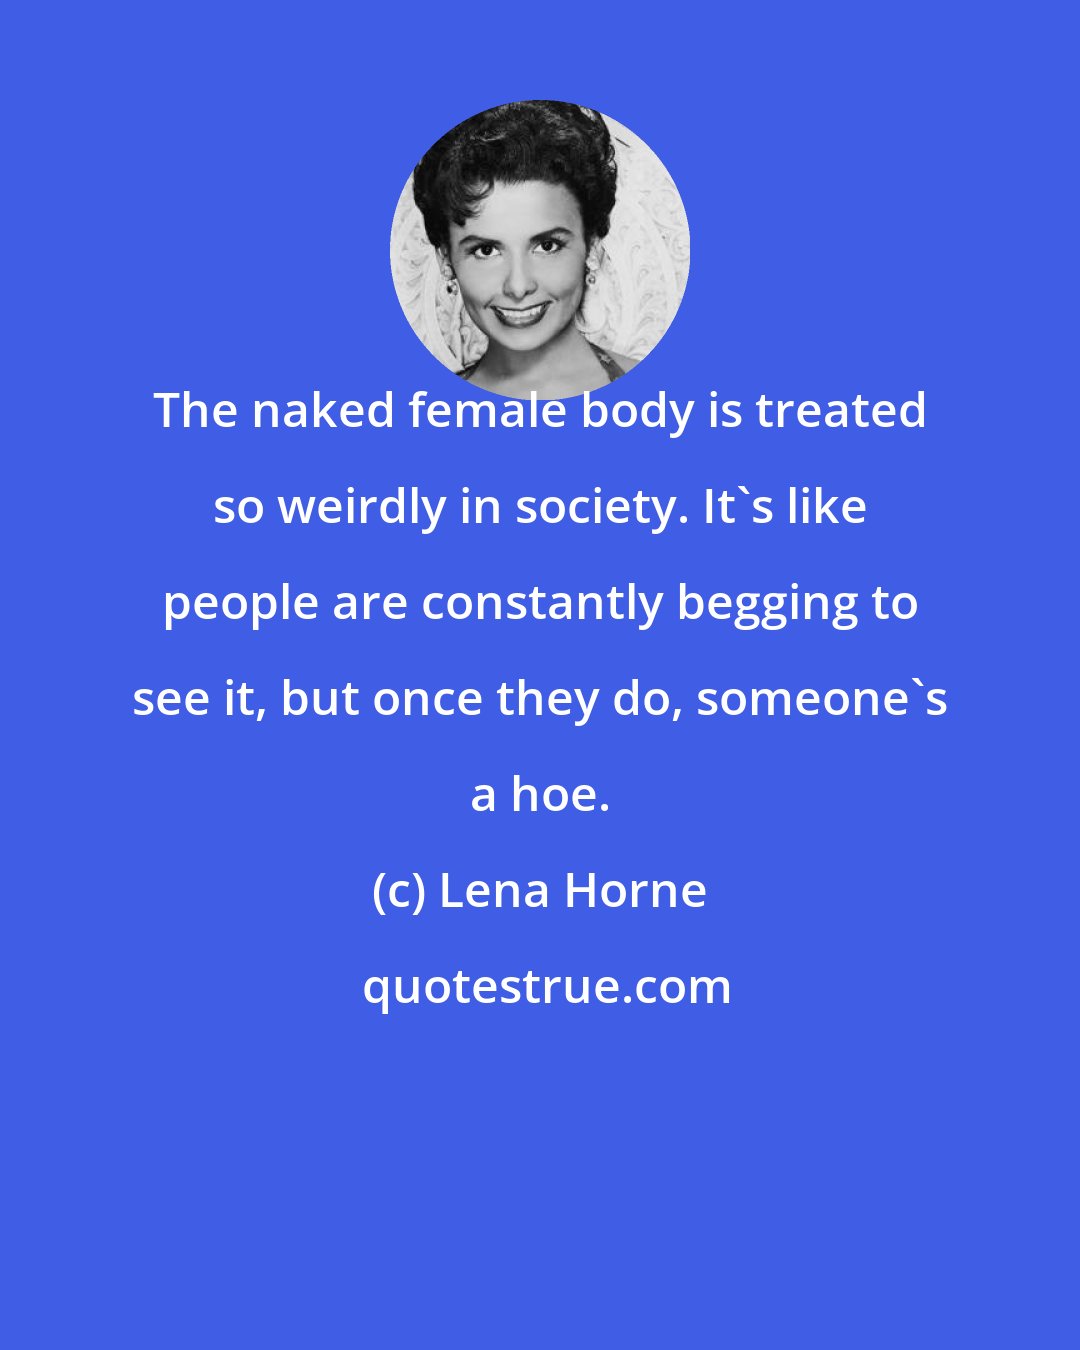 Lena Horne: The naked female body is treated so weirdly in society. It's like people are constantly begging to see it, but once they do, someone's a hoe.